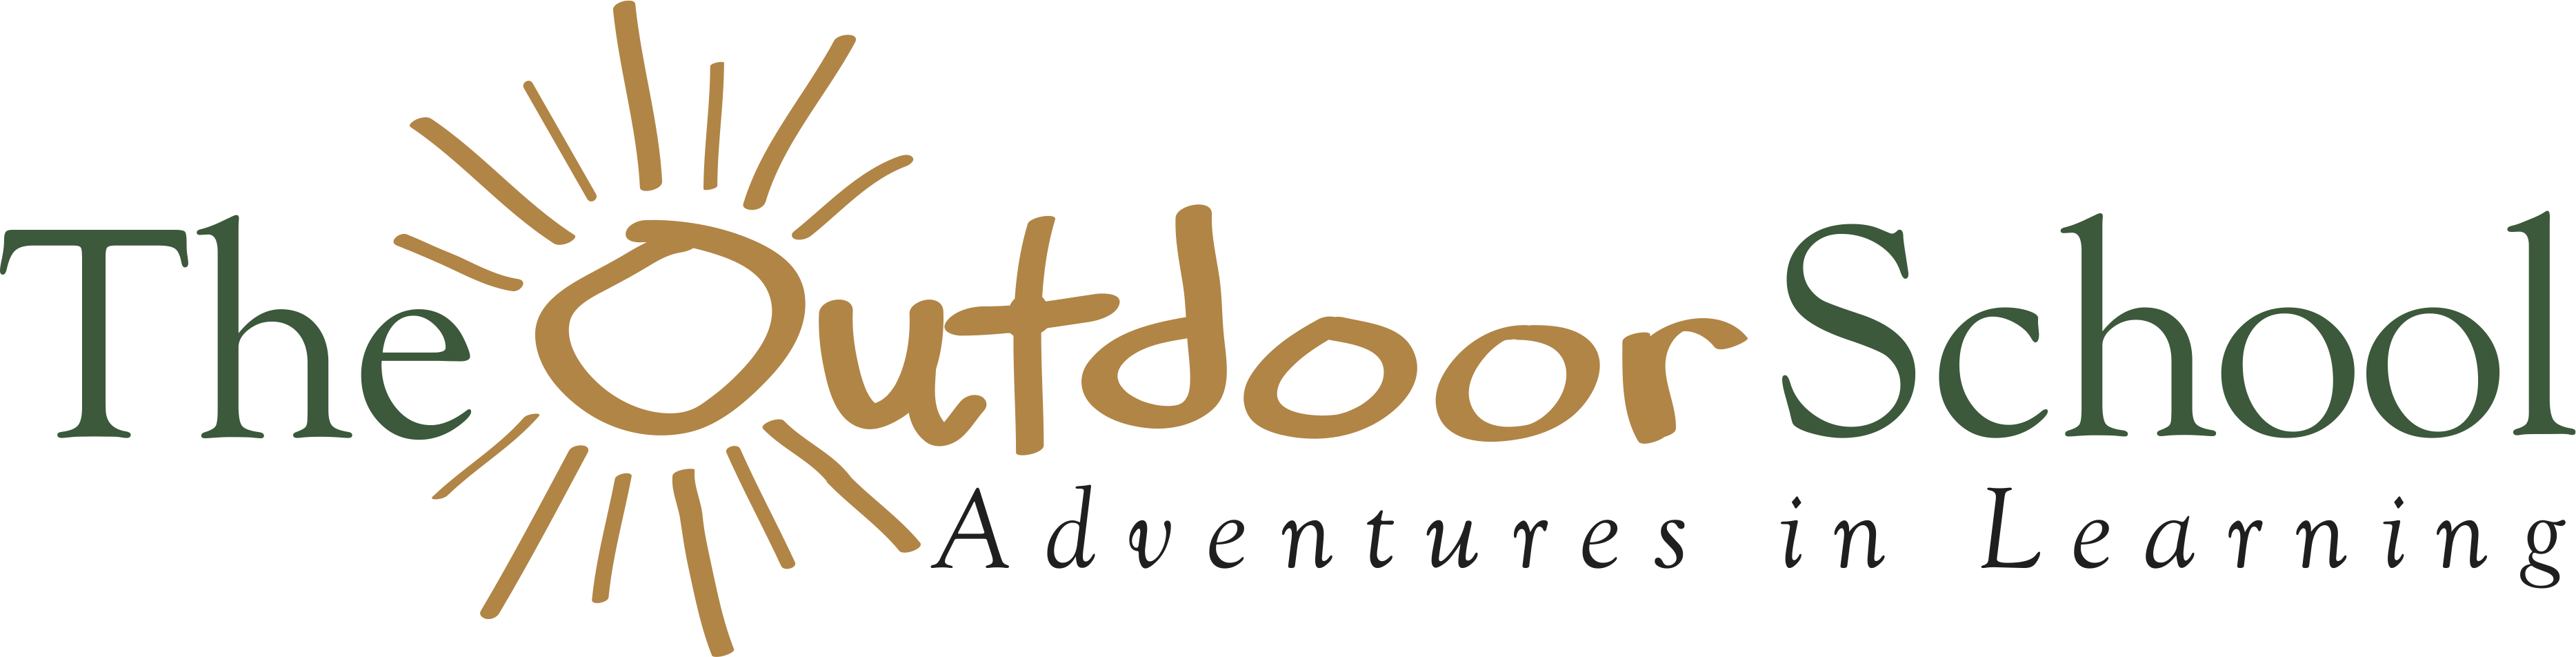 Outdoor Education Instructor